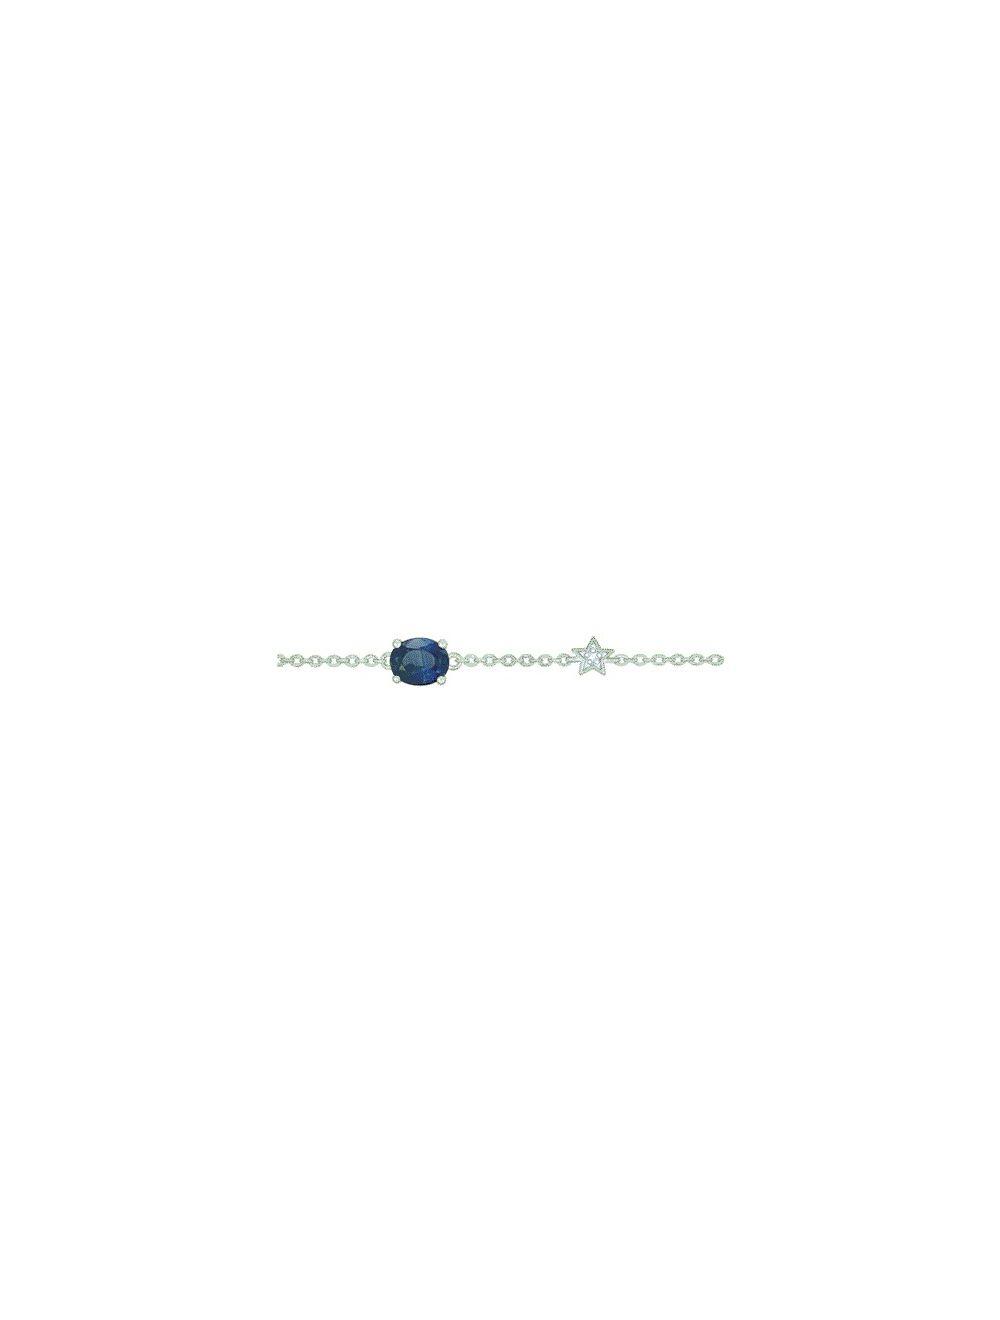 # 18cm white gold bracelet with 0.50ct blue sapphire and 0.005ct natural diamonds